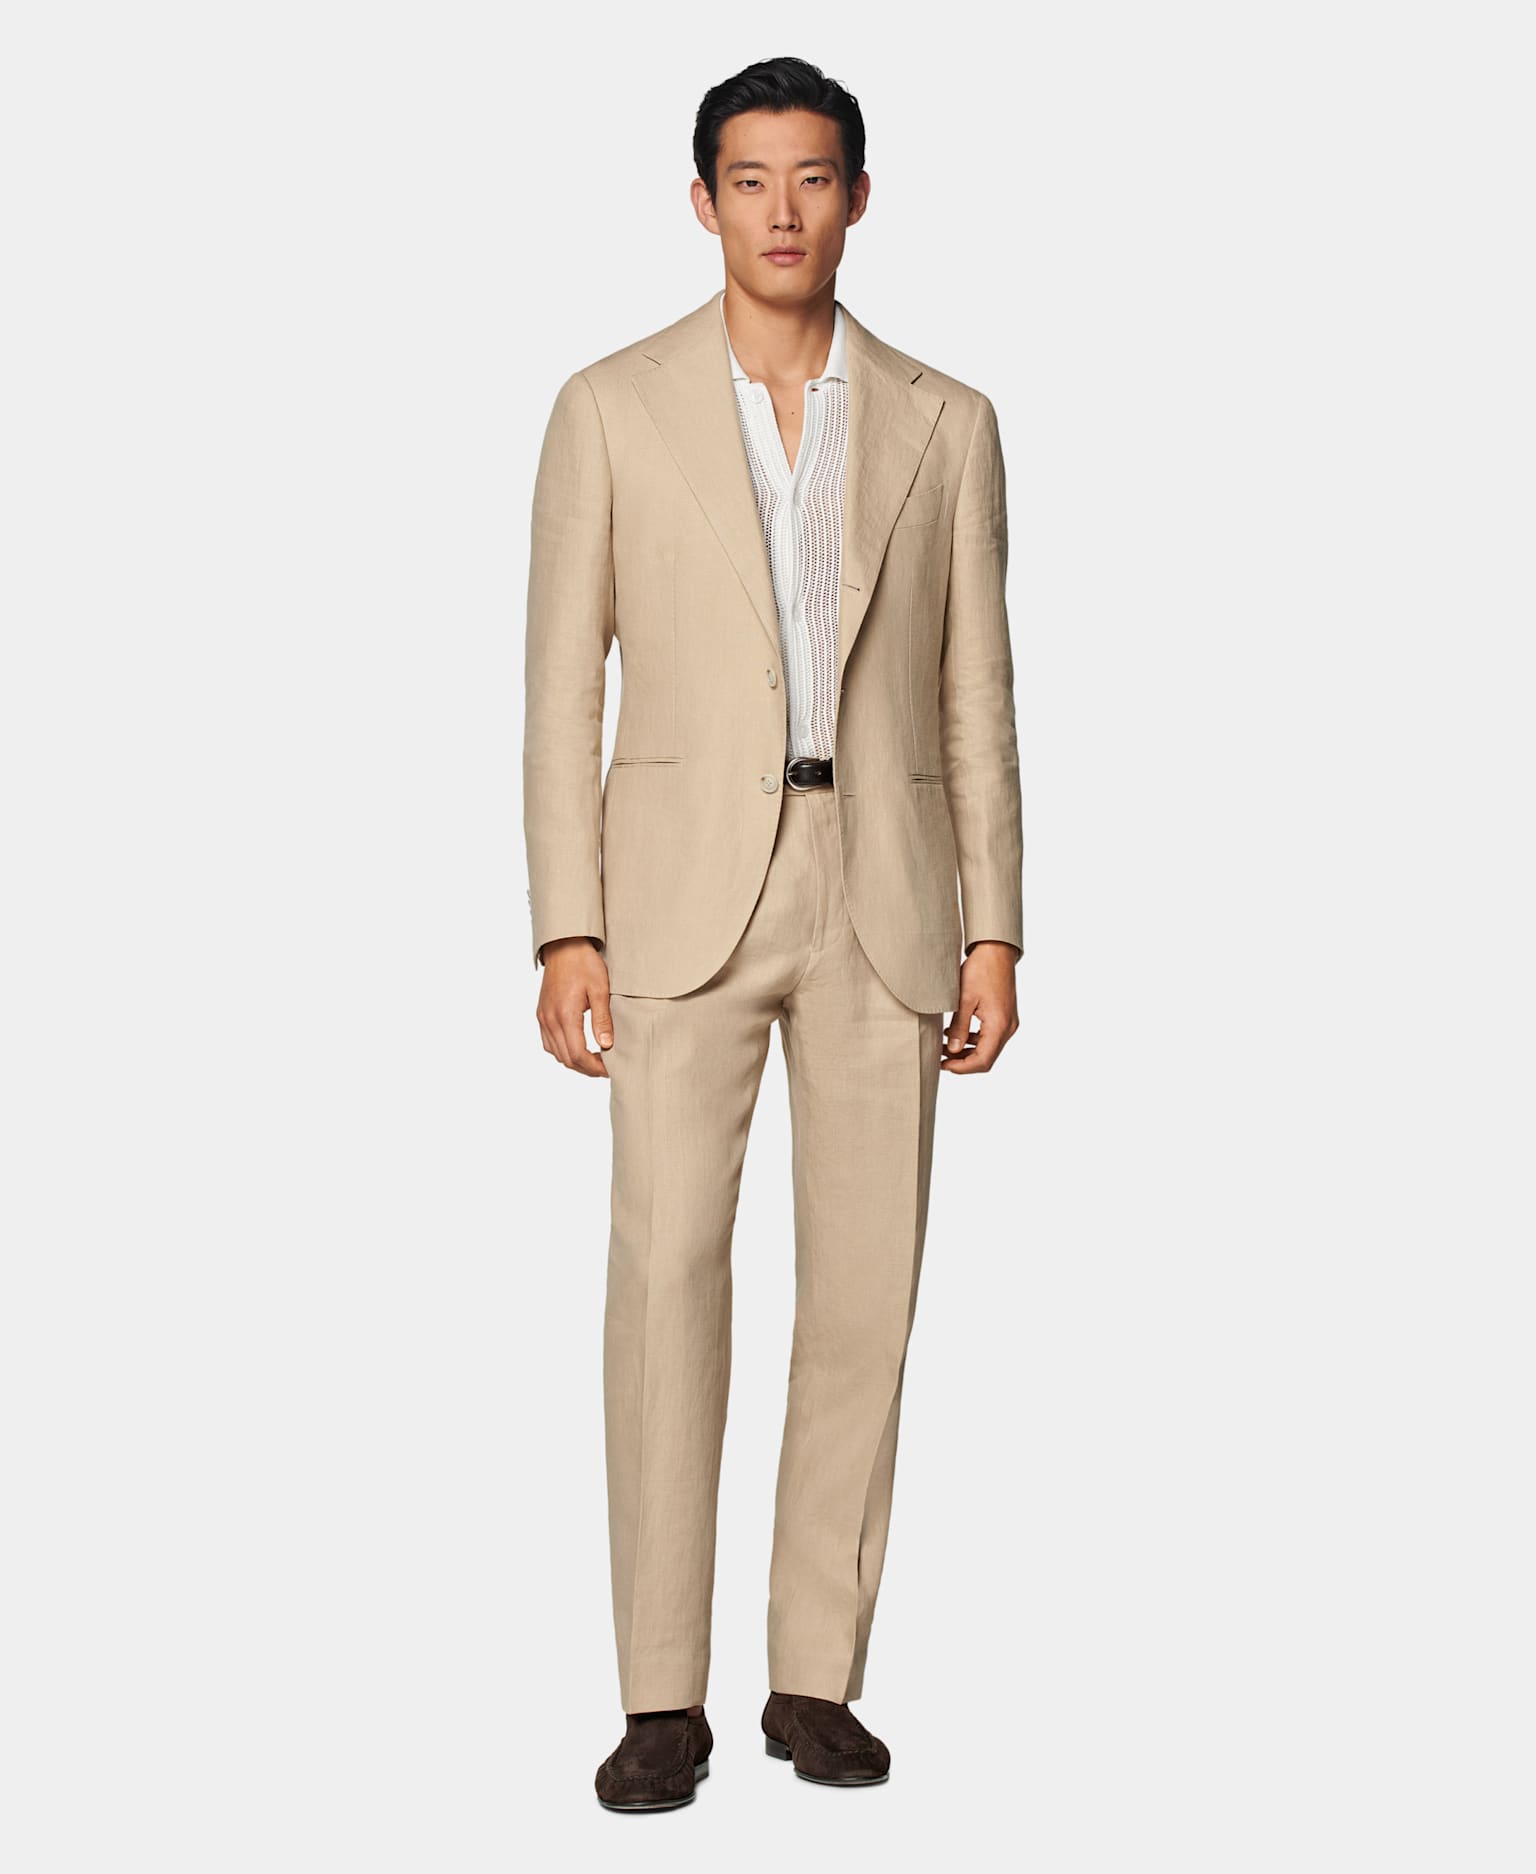 Casual Wedding Attire for Men, What To Wear